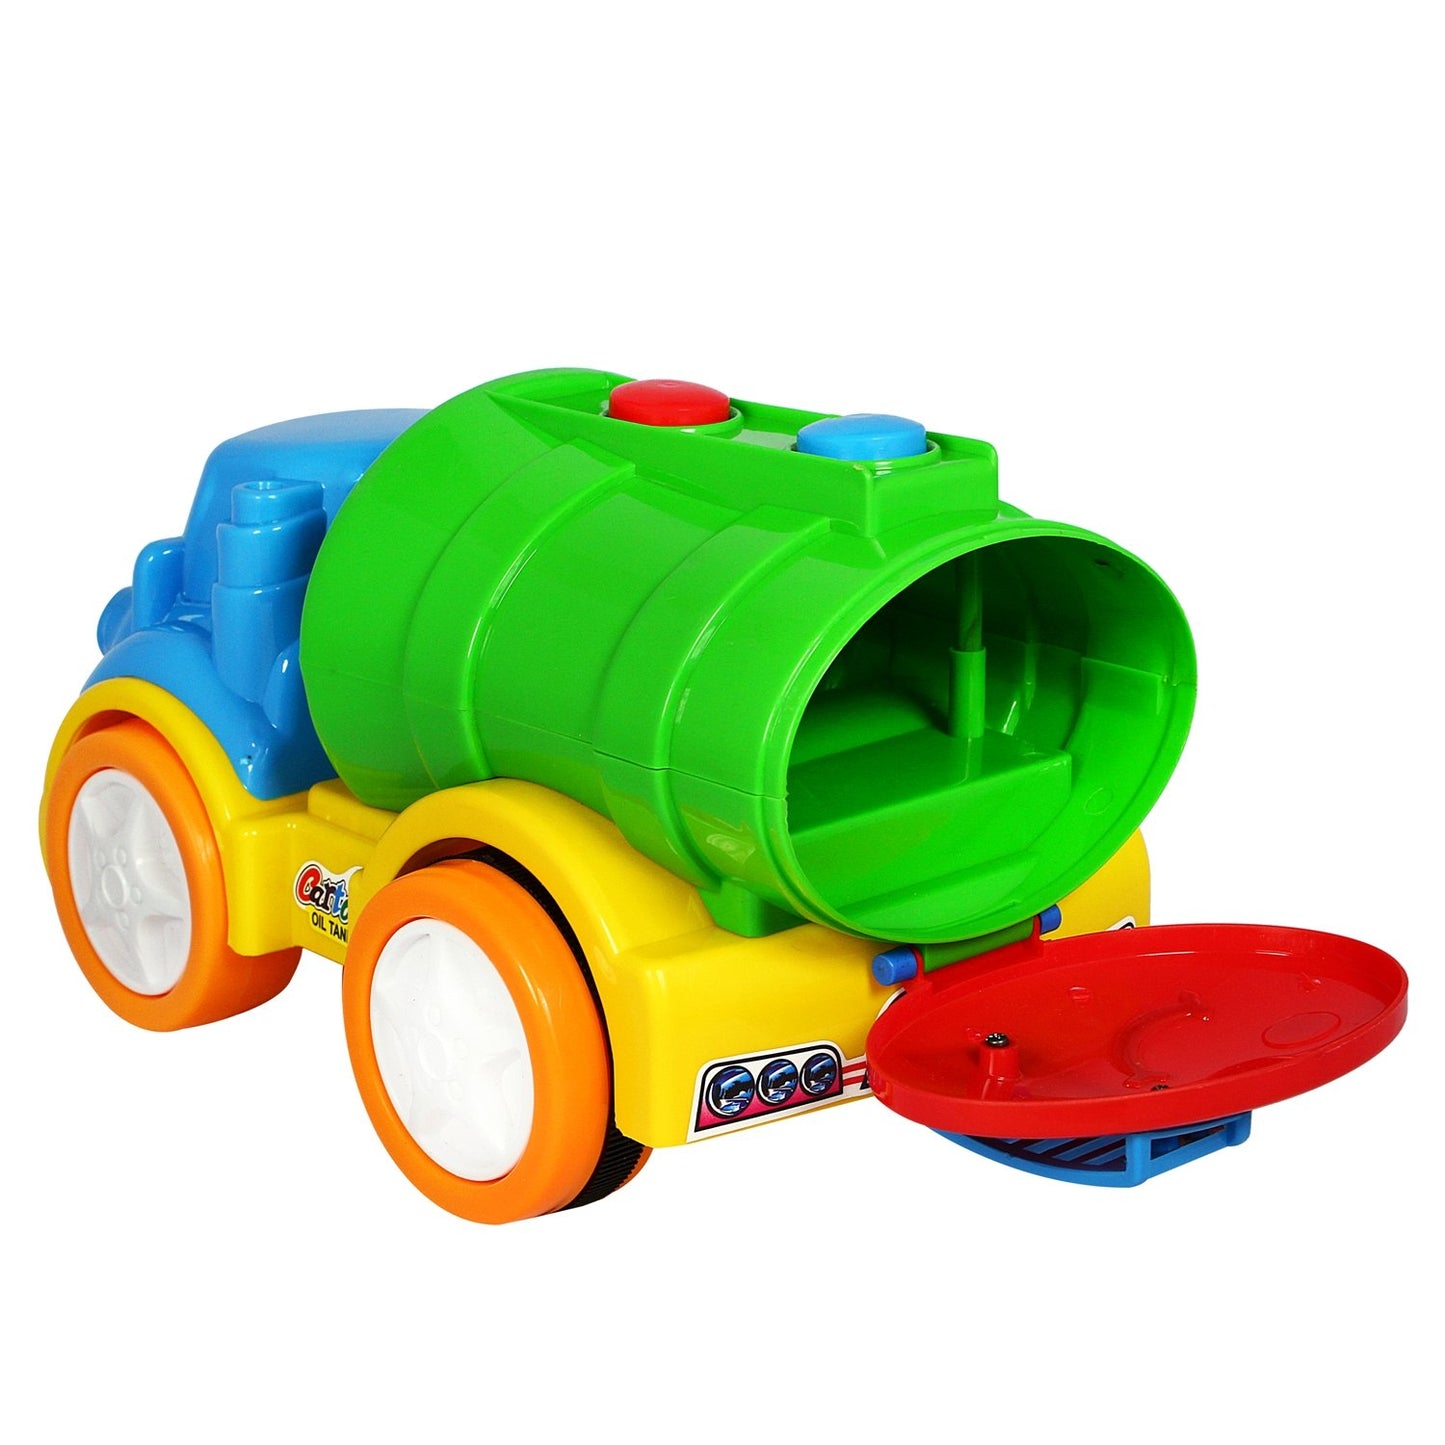 Anand Cartoon Tanker - Multicolor Friction Powered Toy, Interactive Learning Play for Kids Aged 3+ Years